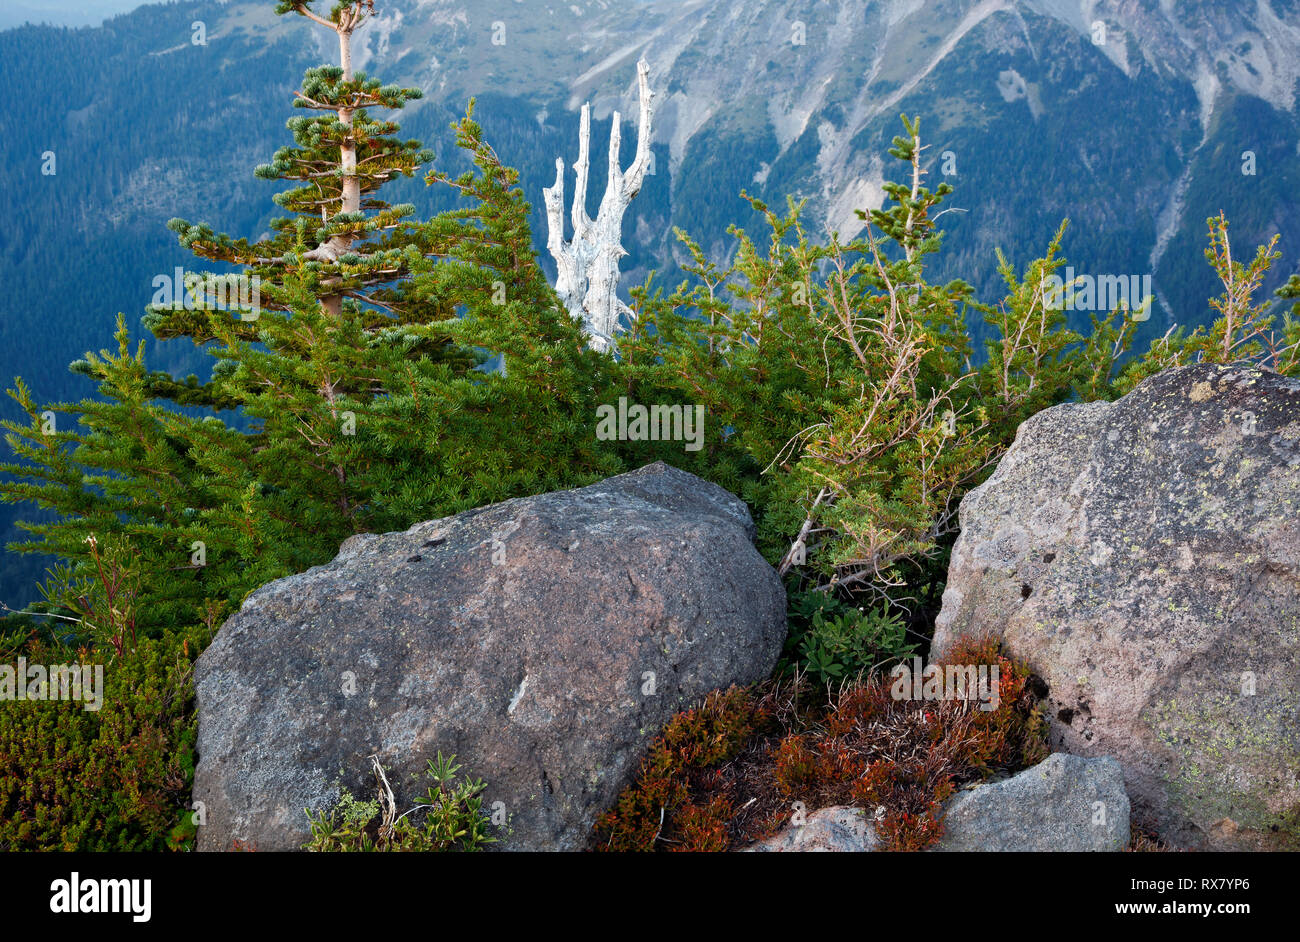 WA15903-00...WASHINGTON - Young trees and remains of a tree brunt in a forest fire on Colonnade Ridge in Mount Rainier National Park. Stock Photo